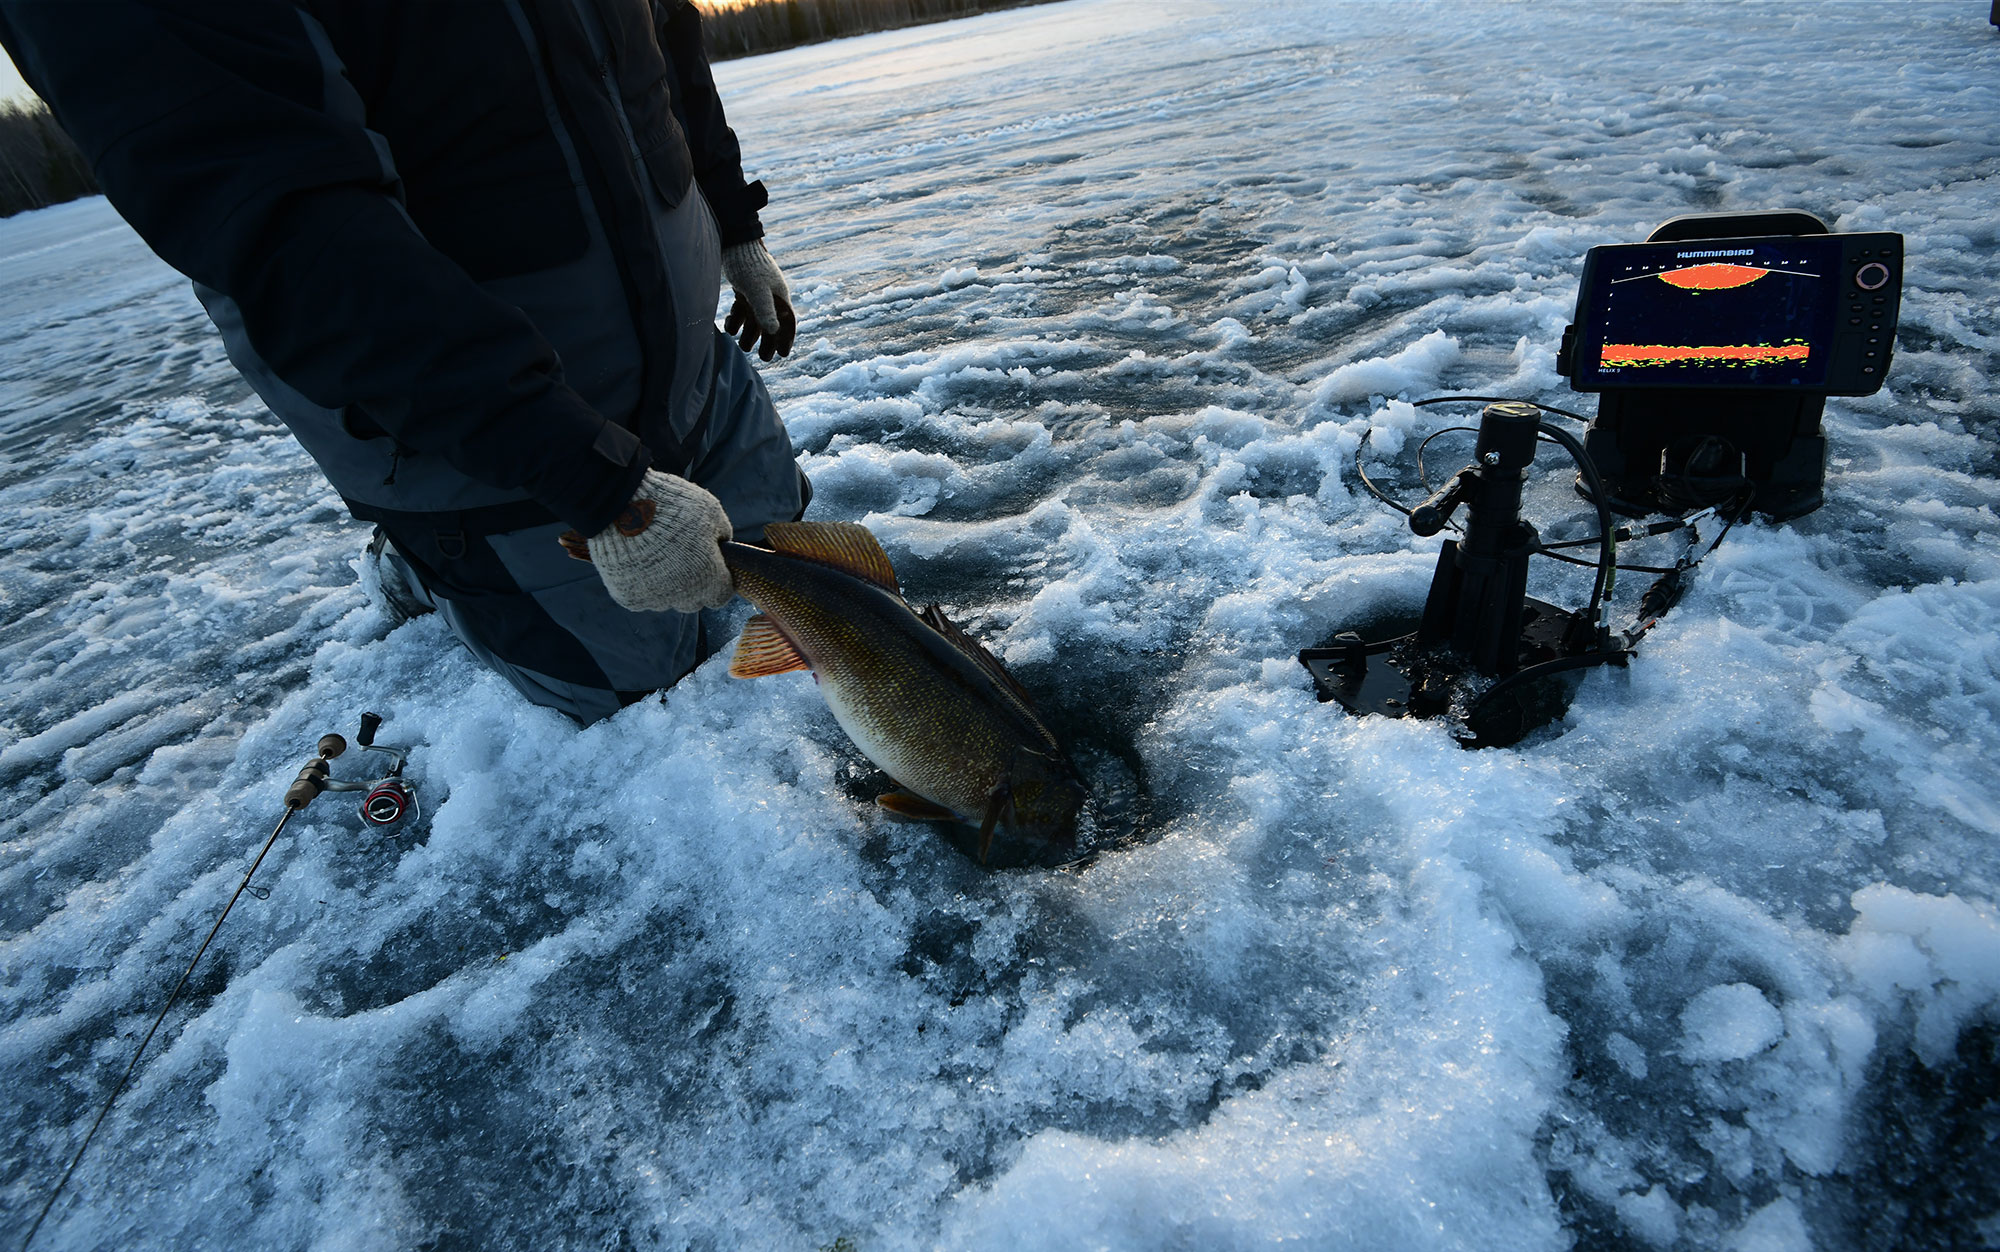 Vexilar Ice Fishing Sonars for sale in Bowmanville, Ontario